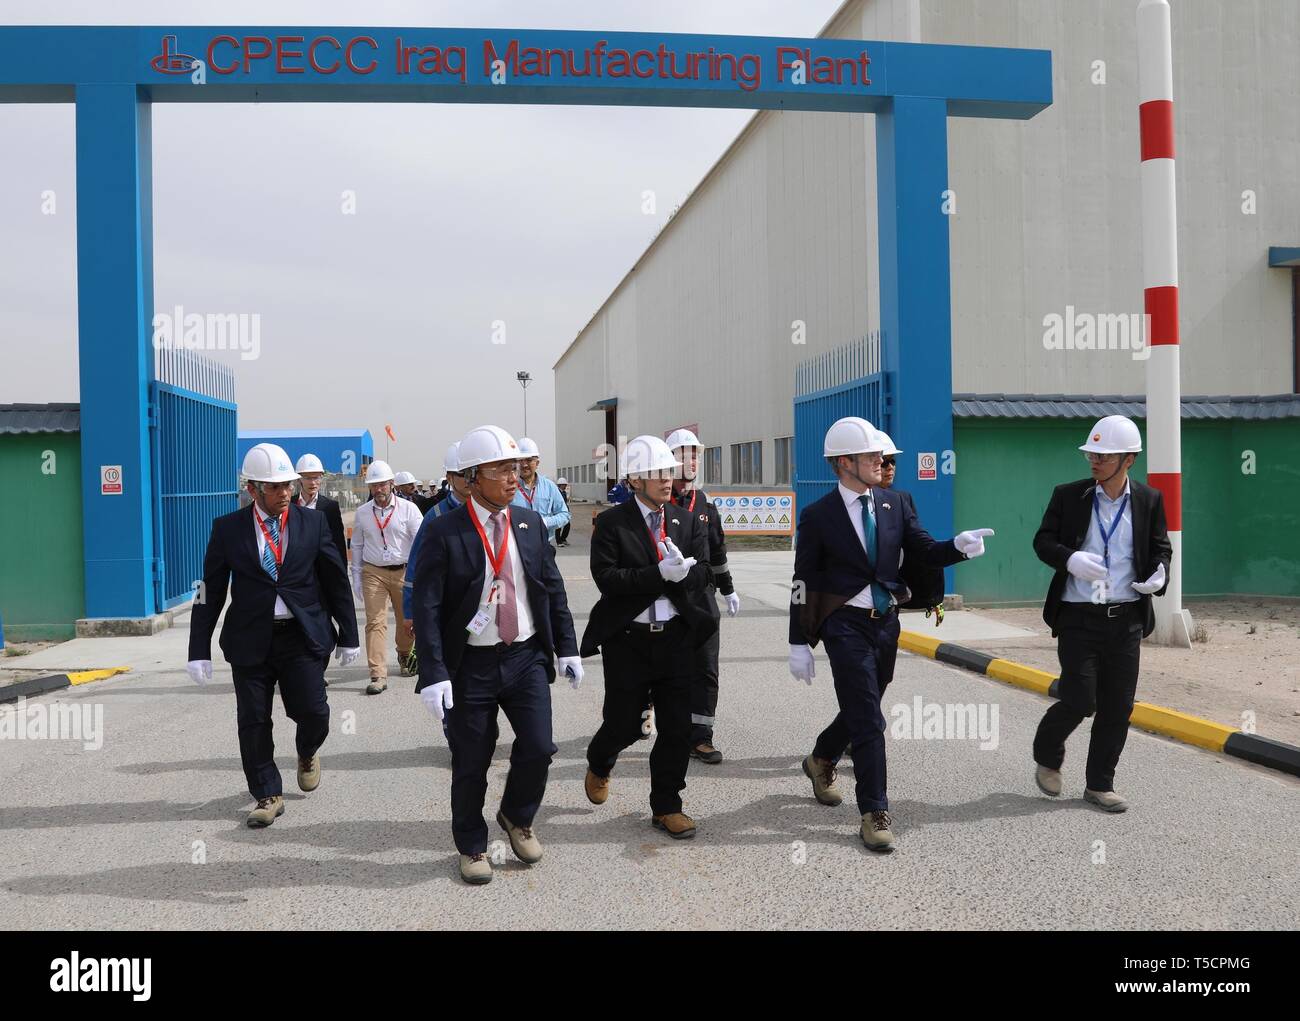 Basra, Iraq. 23rd Apr, 2019. Photo taken on Feb. 27, 2019 shows officials from China Petroleum Engineering and Construction Corporation (CPECC) and Basrah Gas Company inspecting the plant in the southern province of Basra, Iraq. Through the Belt and Road Initiative, the Chinese company can offer financial, technical support and expertise for Iraqi government in reconstructing oil fields and increase their production, said Wang Xianghui, project director of Rumaila in China Petroleum Engineering and Construction Corporation (CPECC). Credit: Khalil Dawood/Xinhua/Alamy Live News Stock Photo